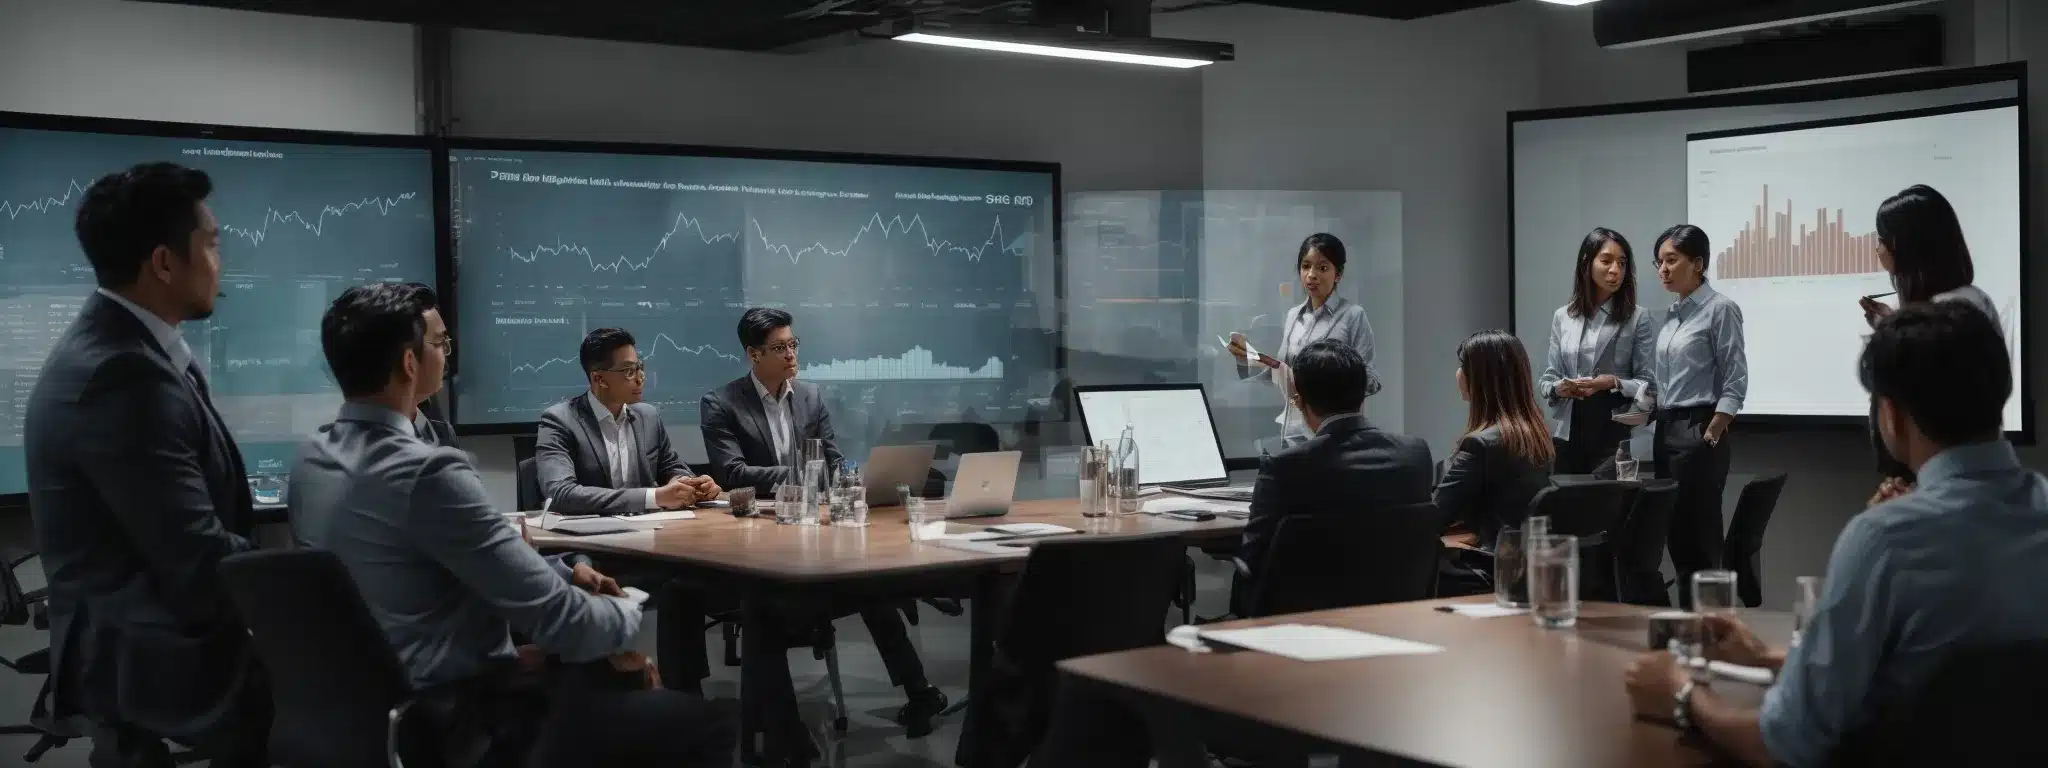 A Group Of Marketing Professionals Engaging In A Collaborative Workshop With Charts And A Projector Display Explaining The Latest Seo/Sem Trends.